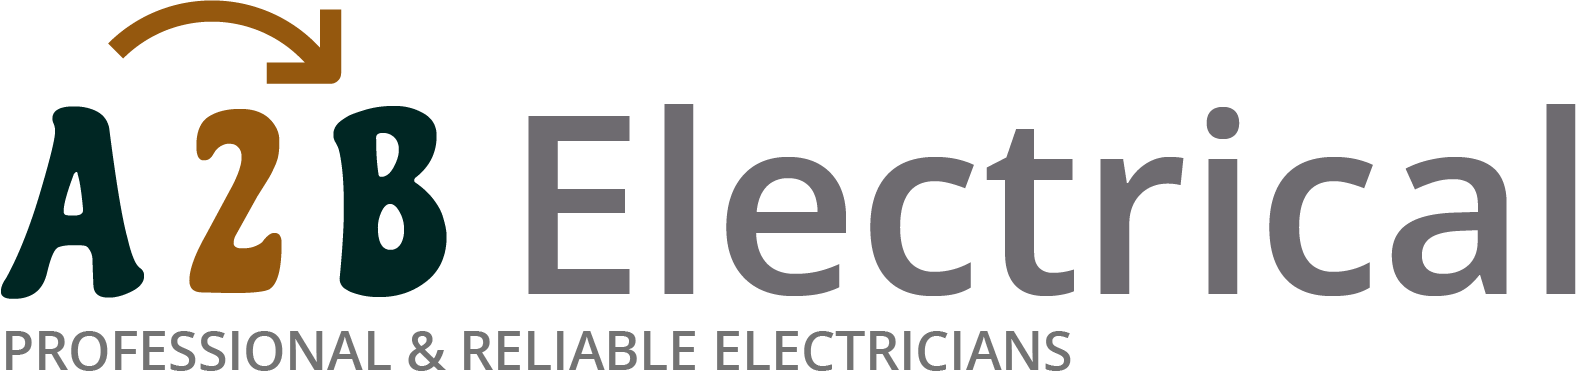 If you have electrical wiring problems in Cradley Heath, we can provide an electrician to have a look for you. 